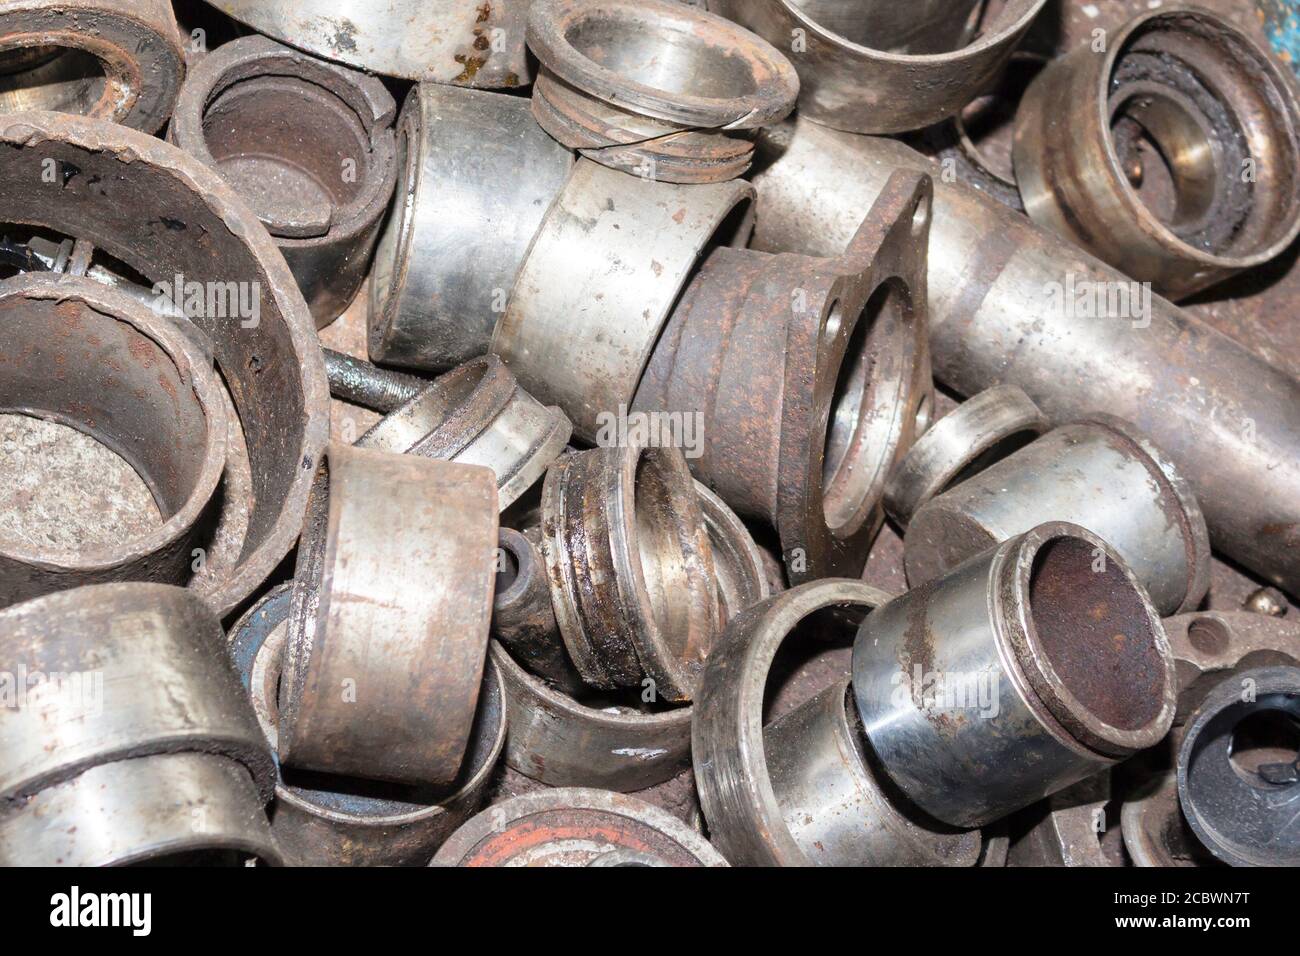 Useless, worn out rusty auto parts and other parts Stock Photo